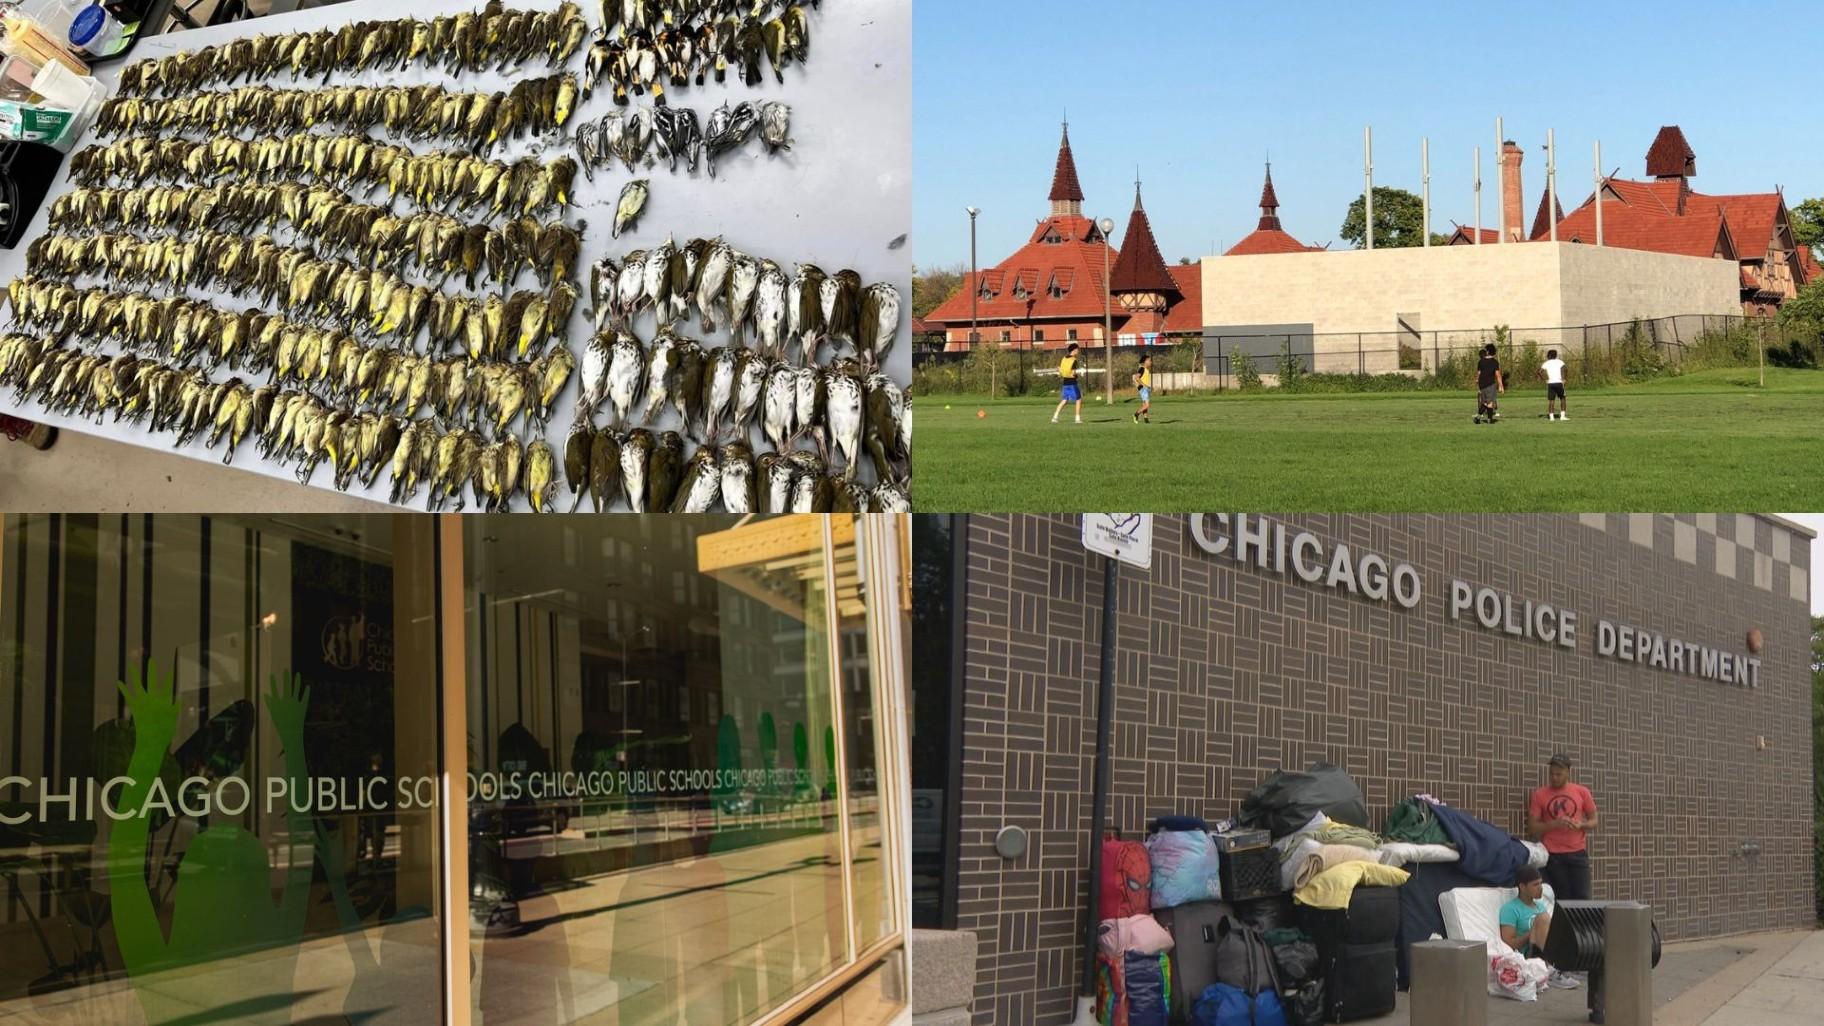 Top left: Field Museum staff collected 1,000 dead birds Thursday from the grounds of McCormick Place. (Courtesy of Taylor Hains). Top right: The cinderblock shell of an illegal building in Humboldt Park, obscuring the landmarked Receptory and Stable building, will be demolished. (Patty Wetli / WTTW News). Bottom left: Chicago Public Schools building. (Michael Izquierdo / WTTW News). Bottom right: Migrants outside a Chicago police station. (WTTW News)